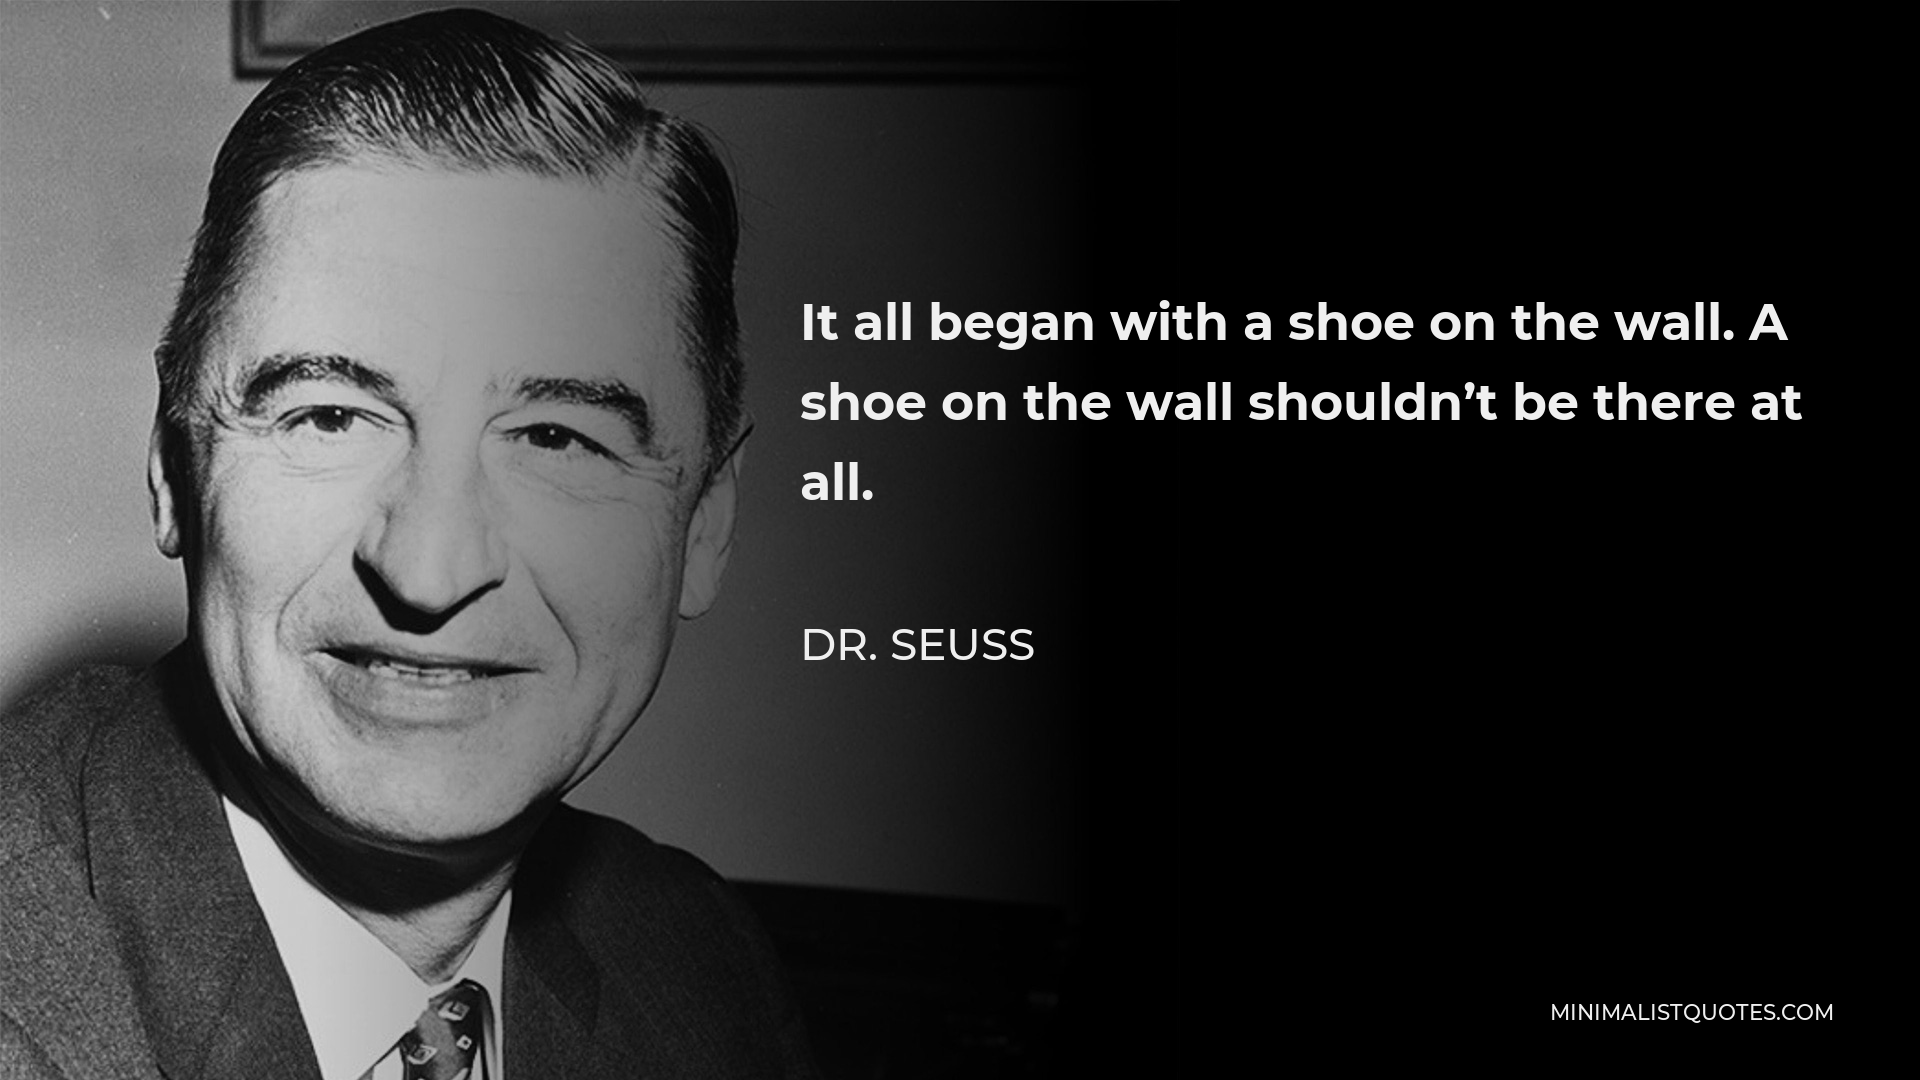 Dr. Seuss Quote - It all began with a shoe on the wall. A shoe on the wall shouldn’t be there at all.